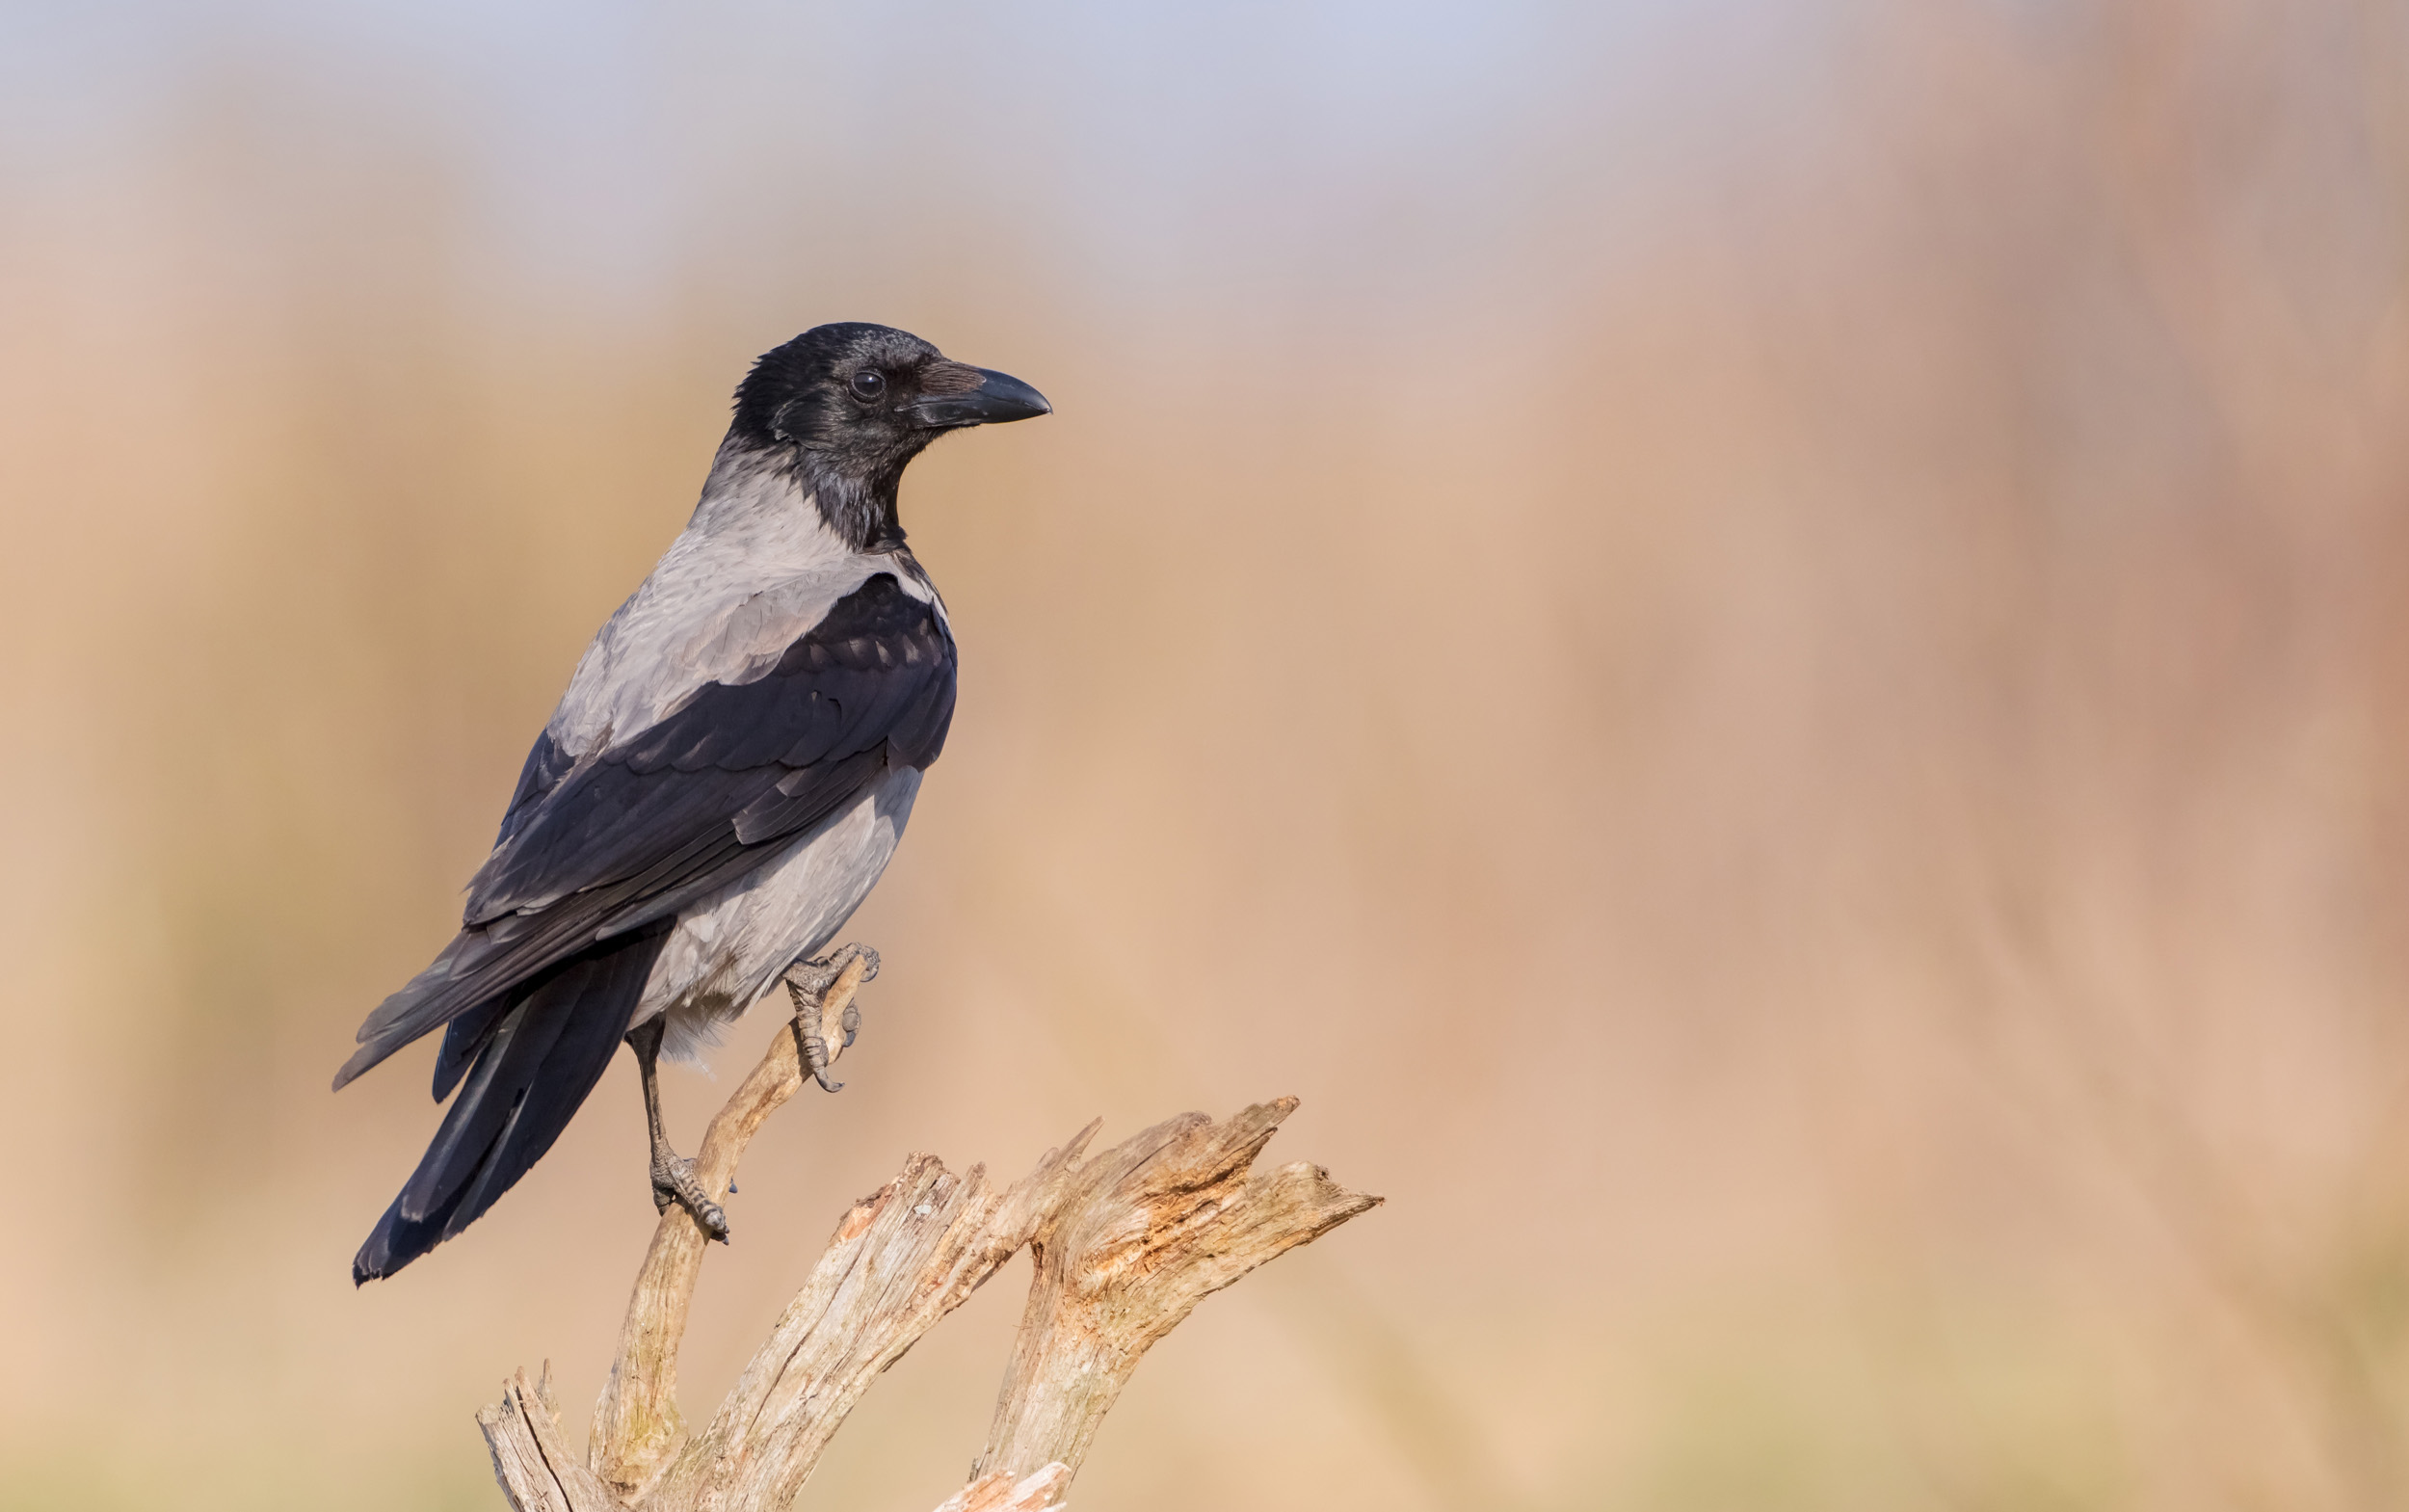 A lone Hooded Crow looking out over fields.